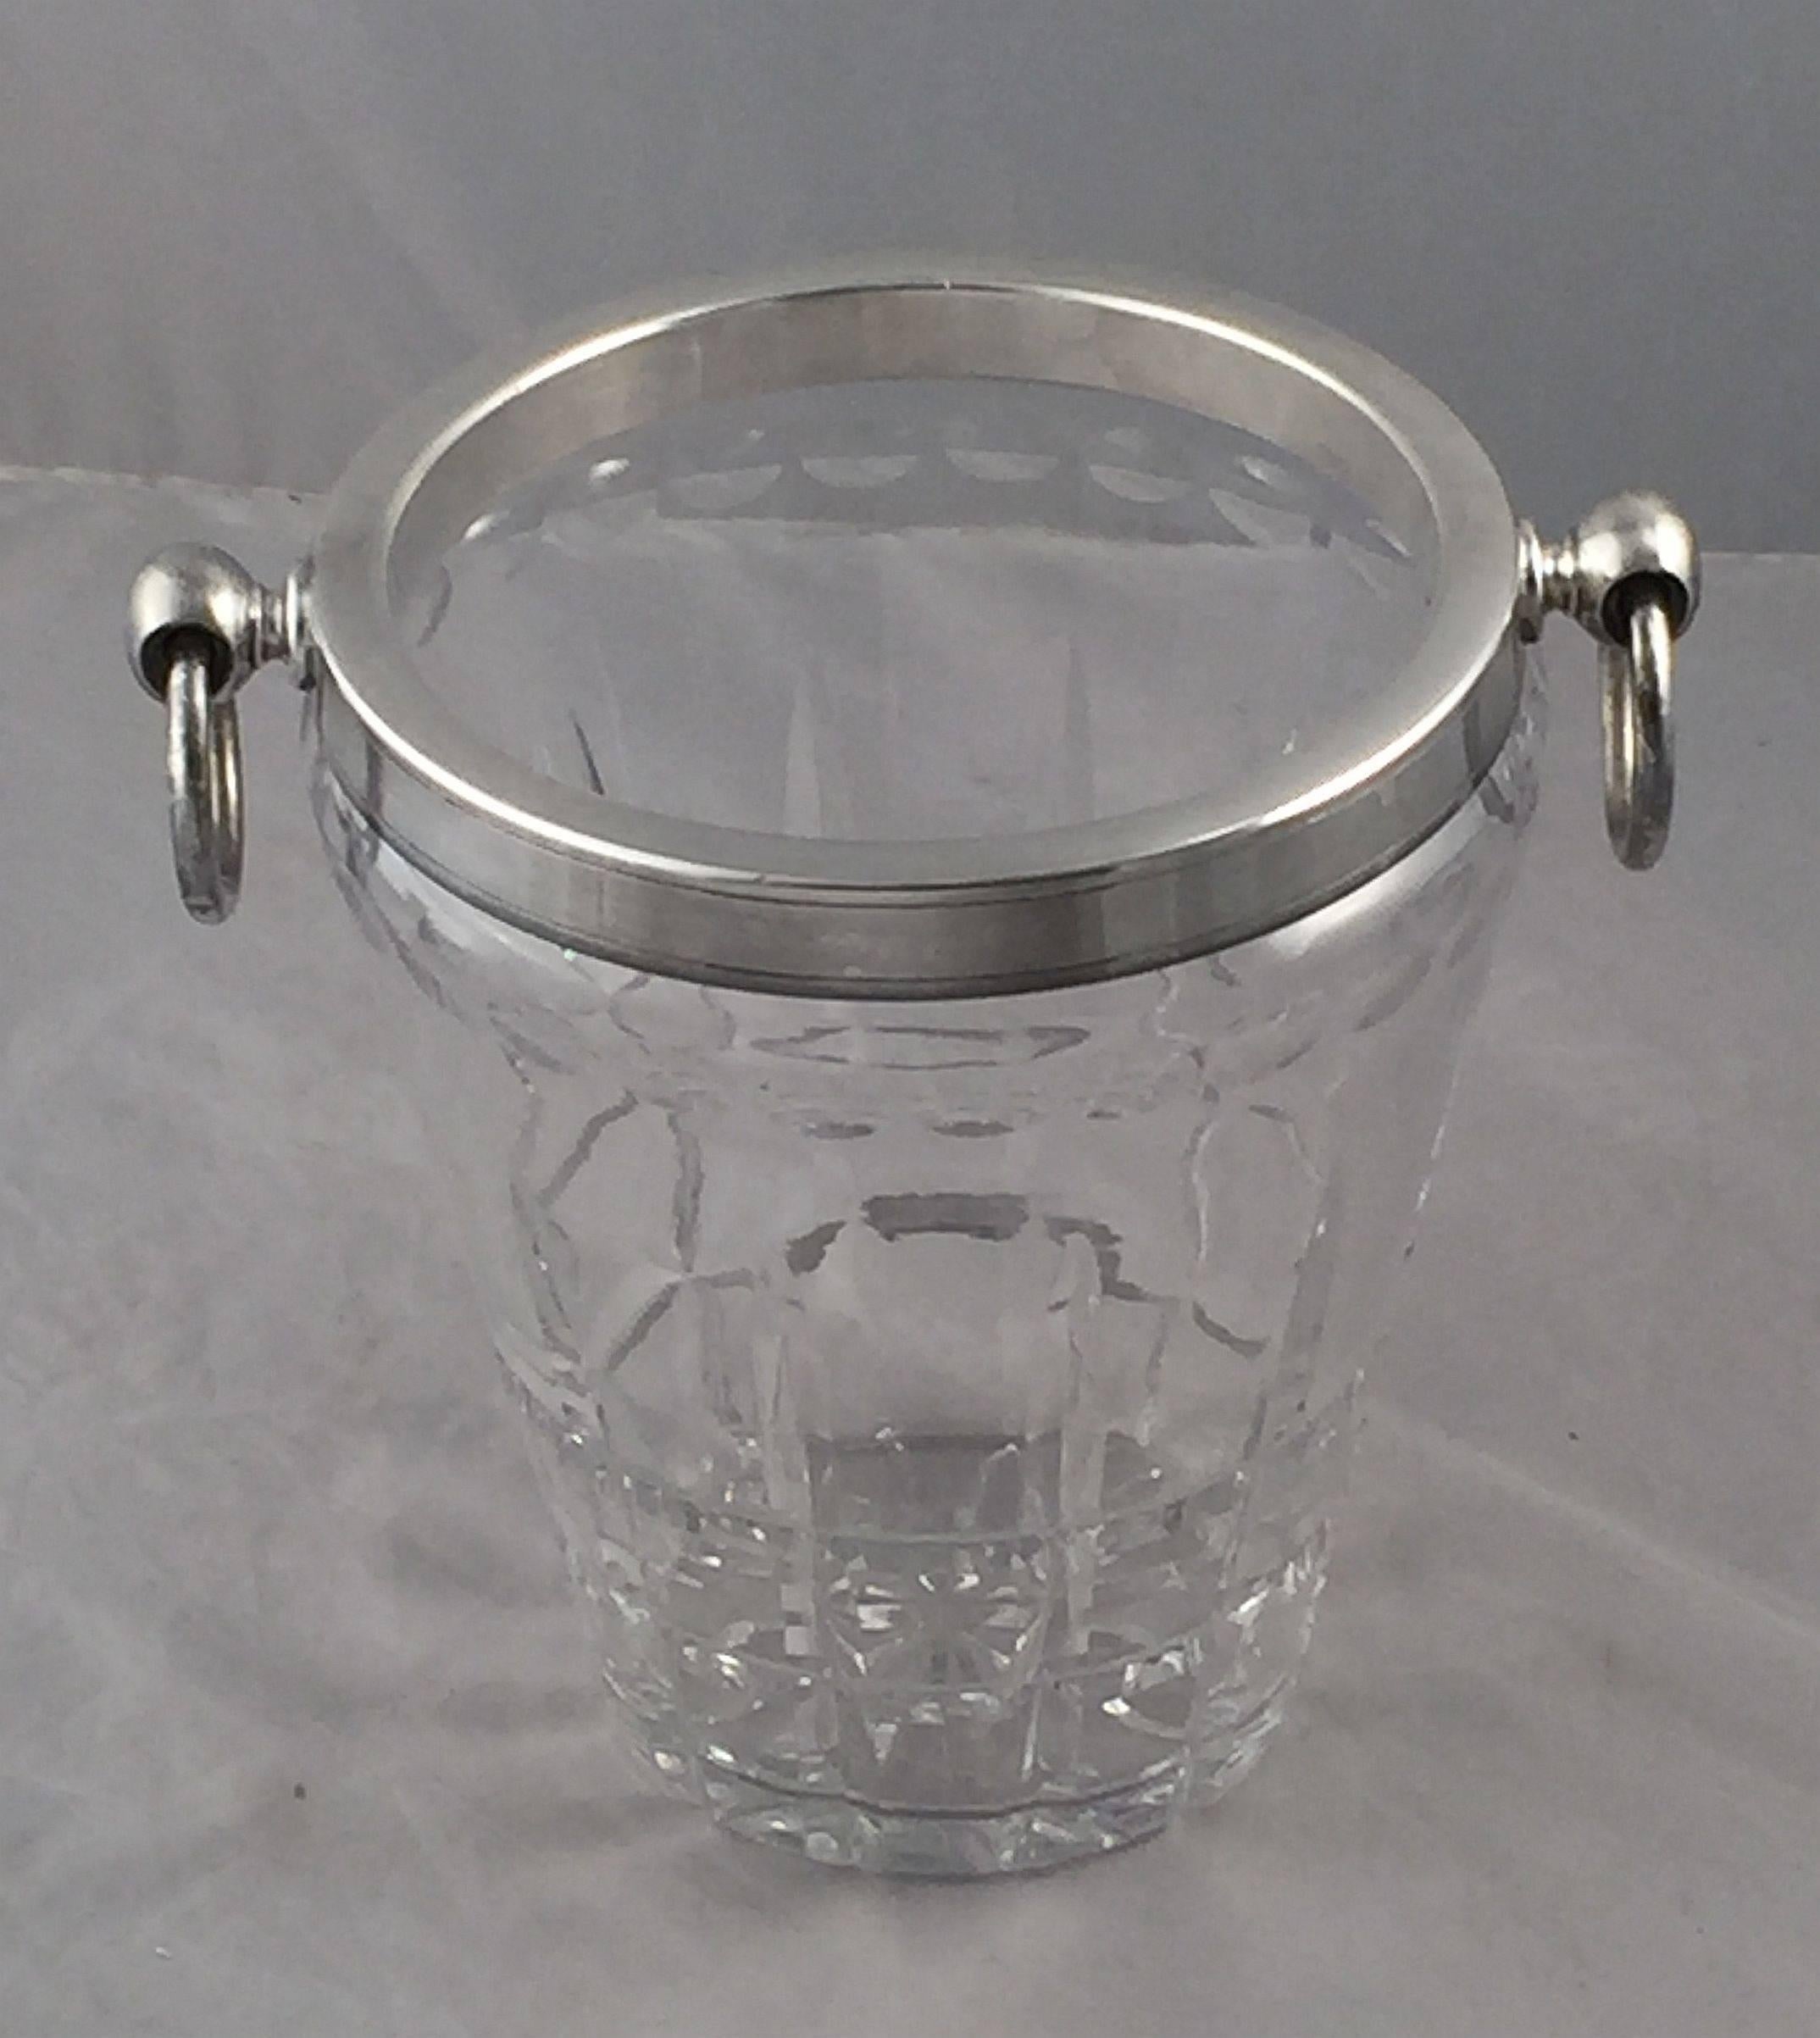 A fine vintage large French wine cooler and ice bucket of silver and cut crystal glass, featuring handsome clean lines and two opposing ring handles.

H 9 1/4